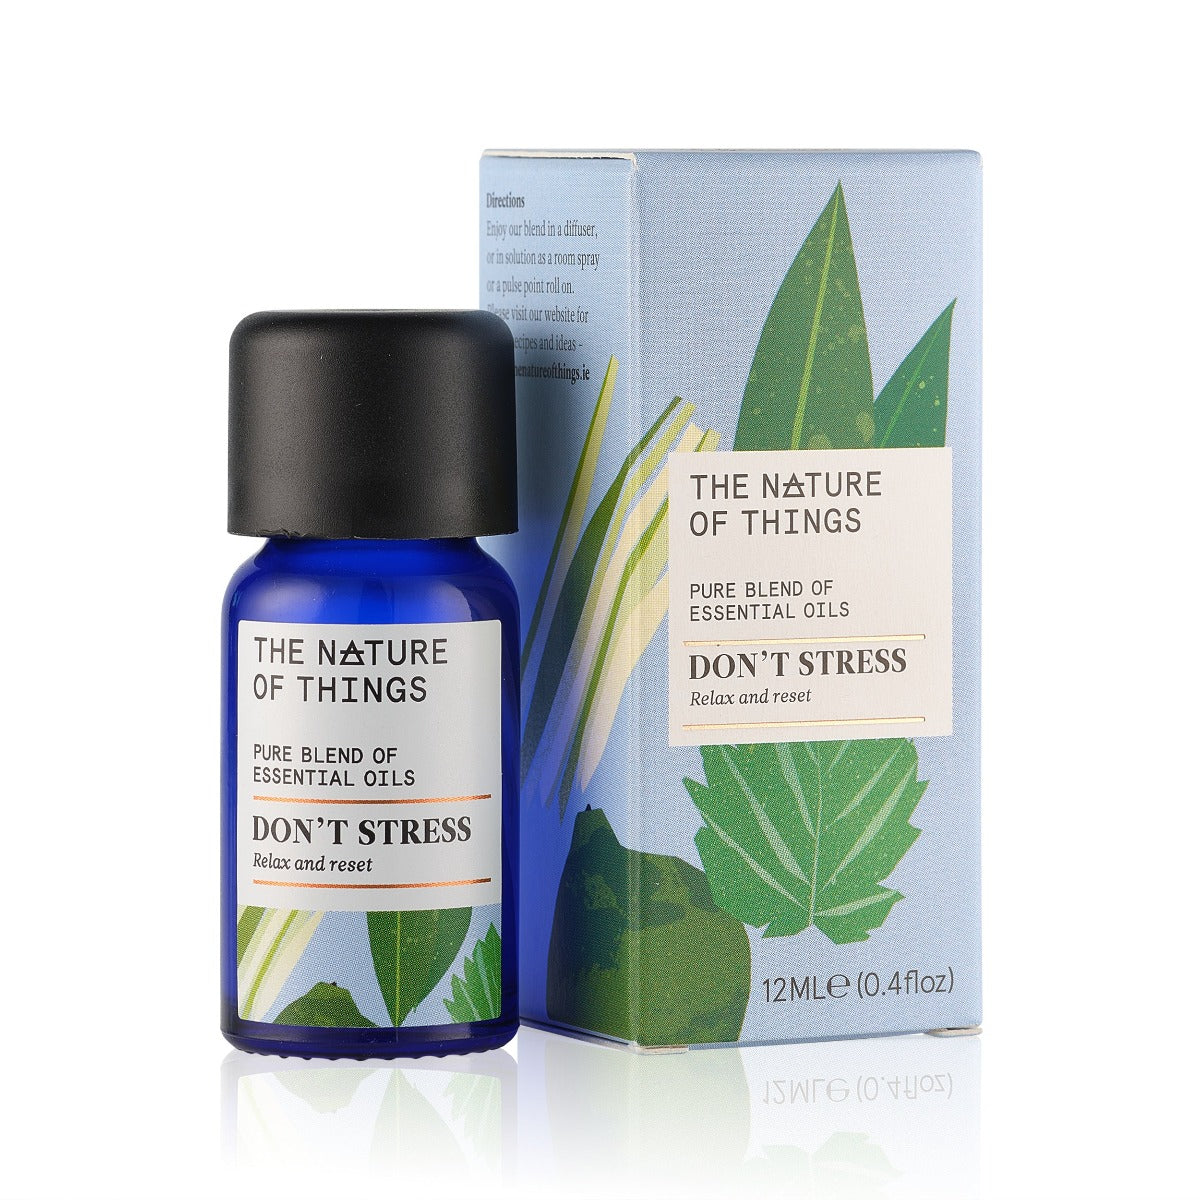 Don't Stress Essential Oil Blend from The Nature of Things